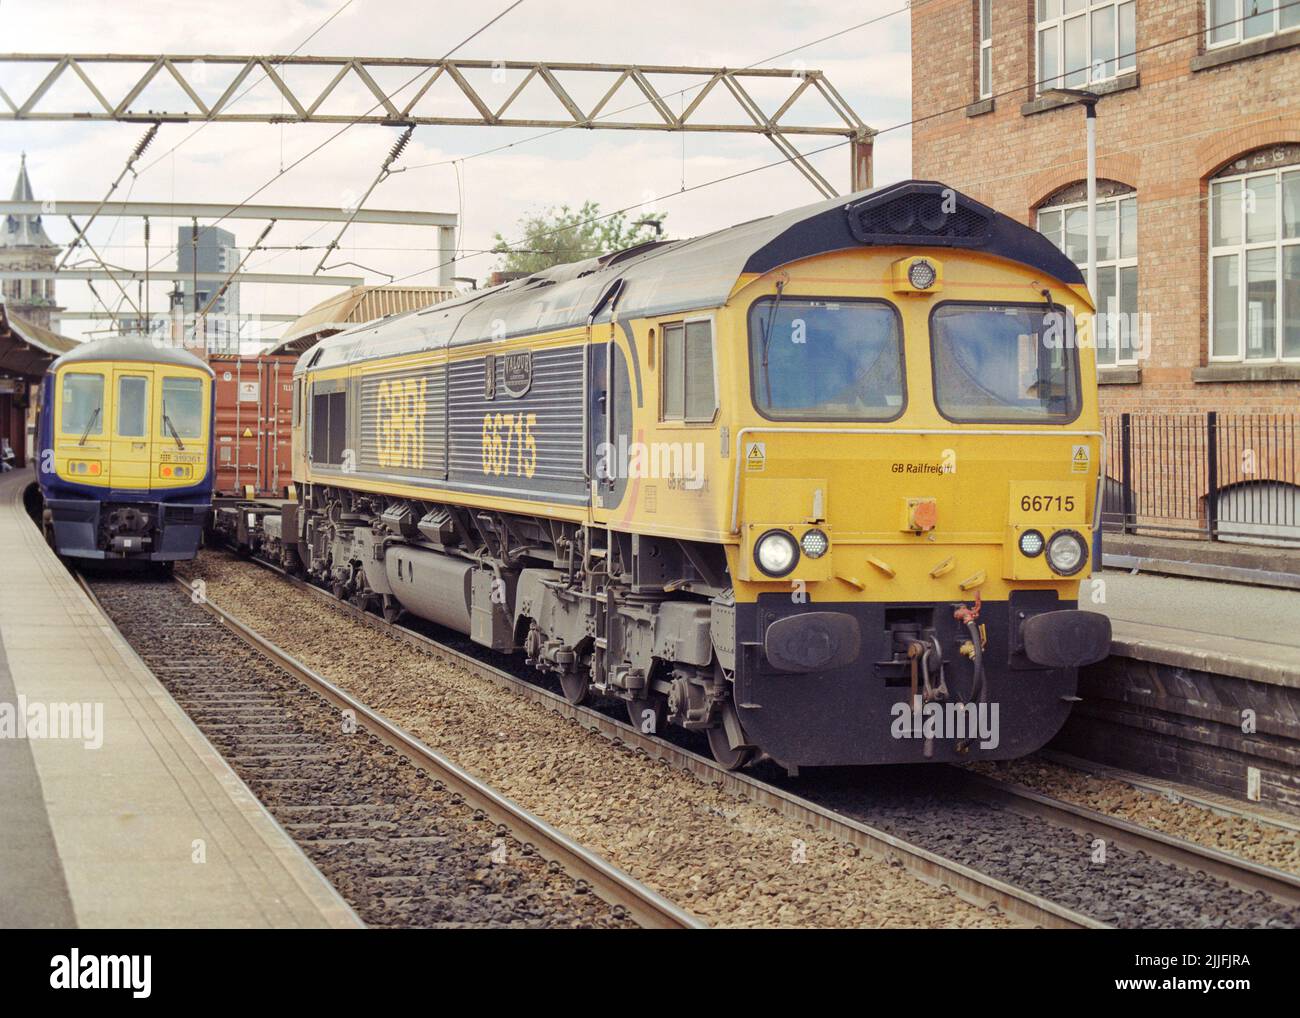 Manchester, UK - June 2022: A diesel locomotive (Class 66 66715) pulled a container train past Deansgate station, a passenger train in the rear. Stock Photo